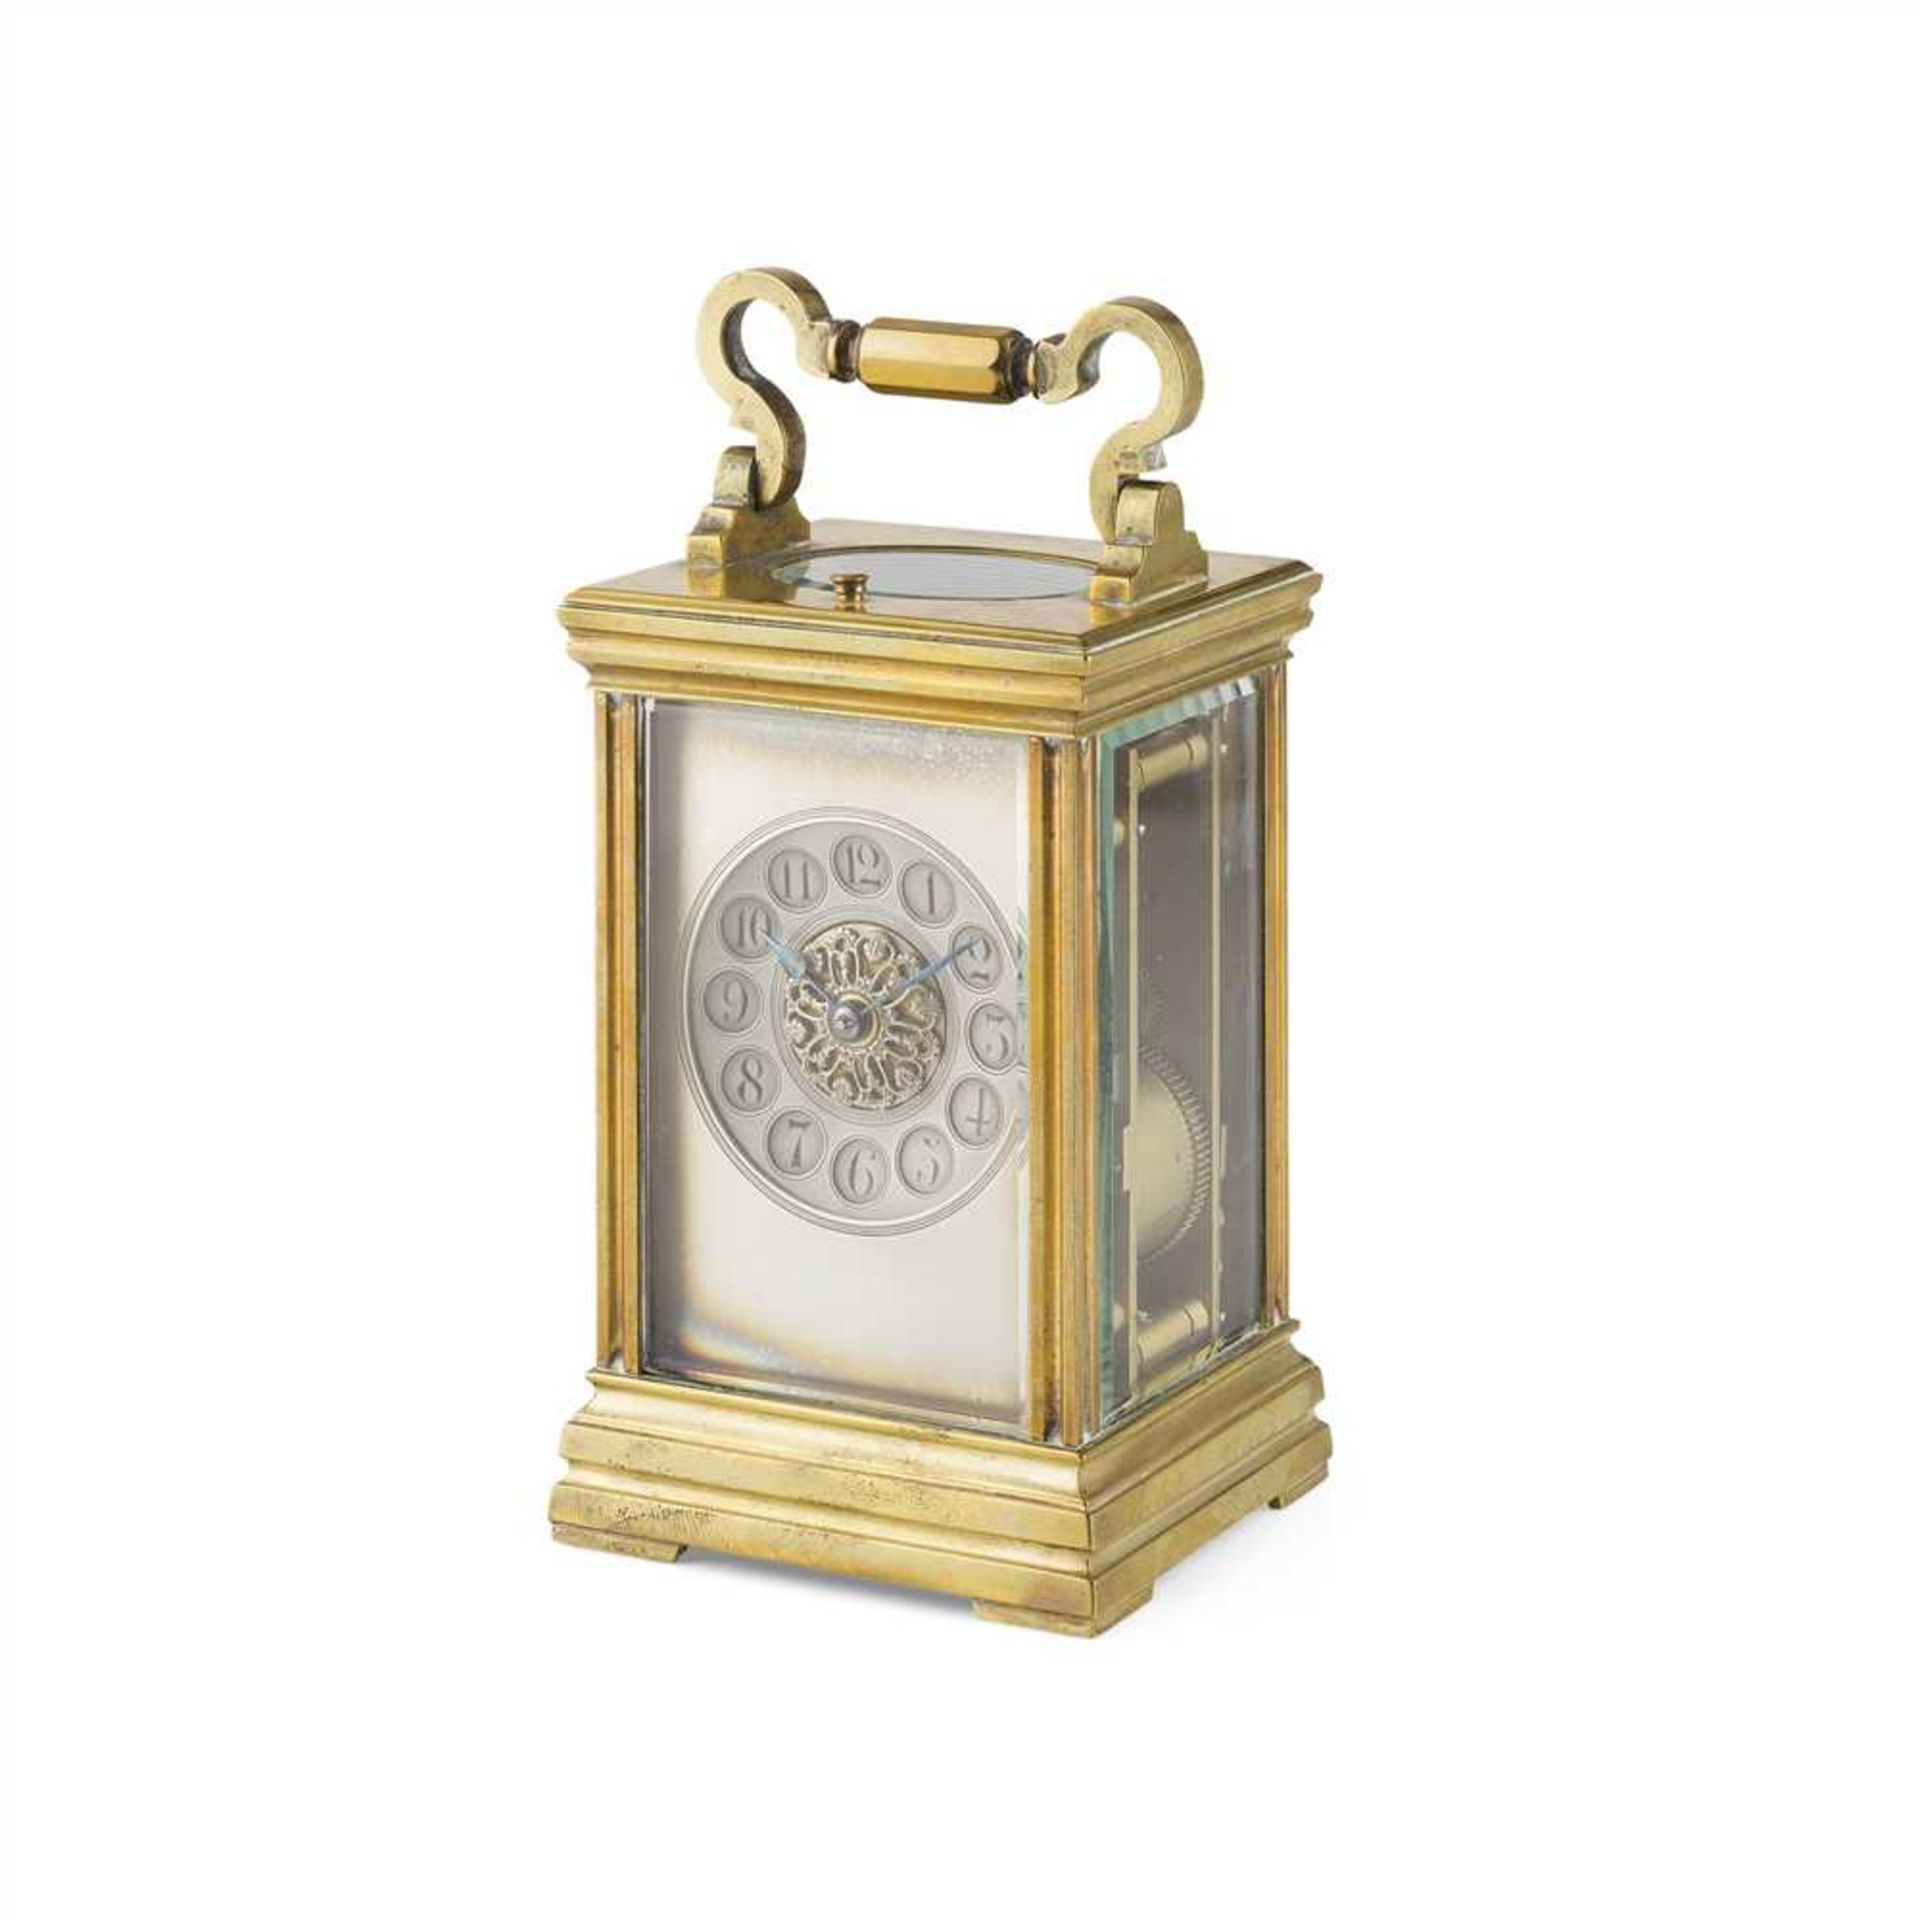 FRENCH BRASS REPEATING CARRIAGE CLOCK, E. MAURICE & CO. LATE 19TH/ EARLY 20TH CENTURY